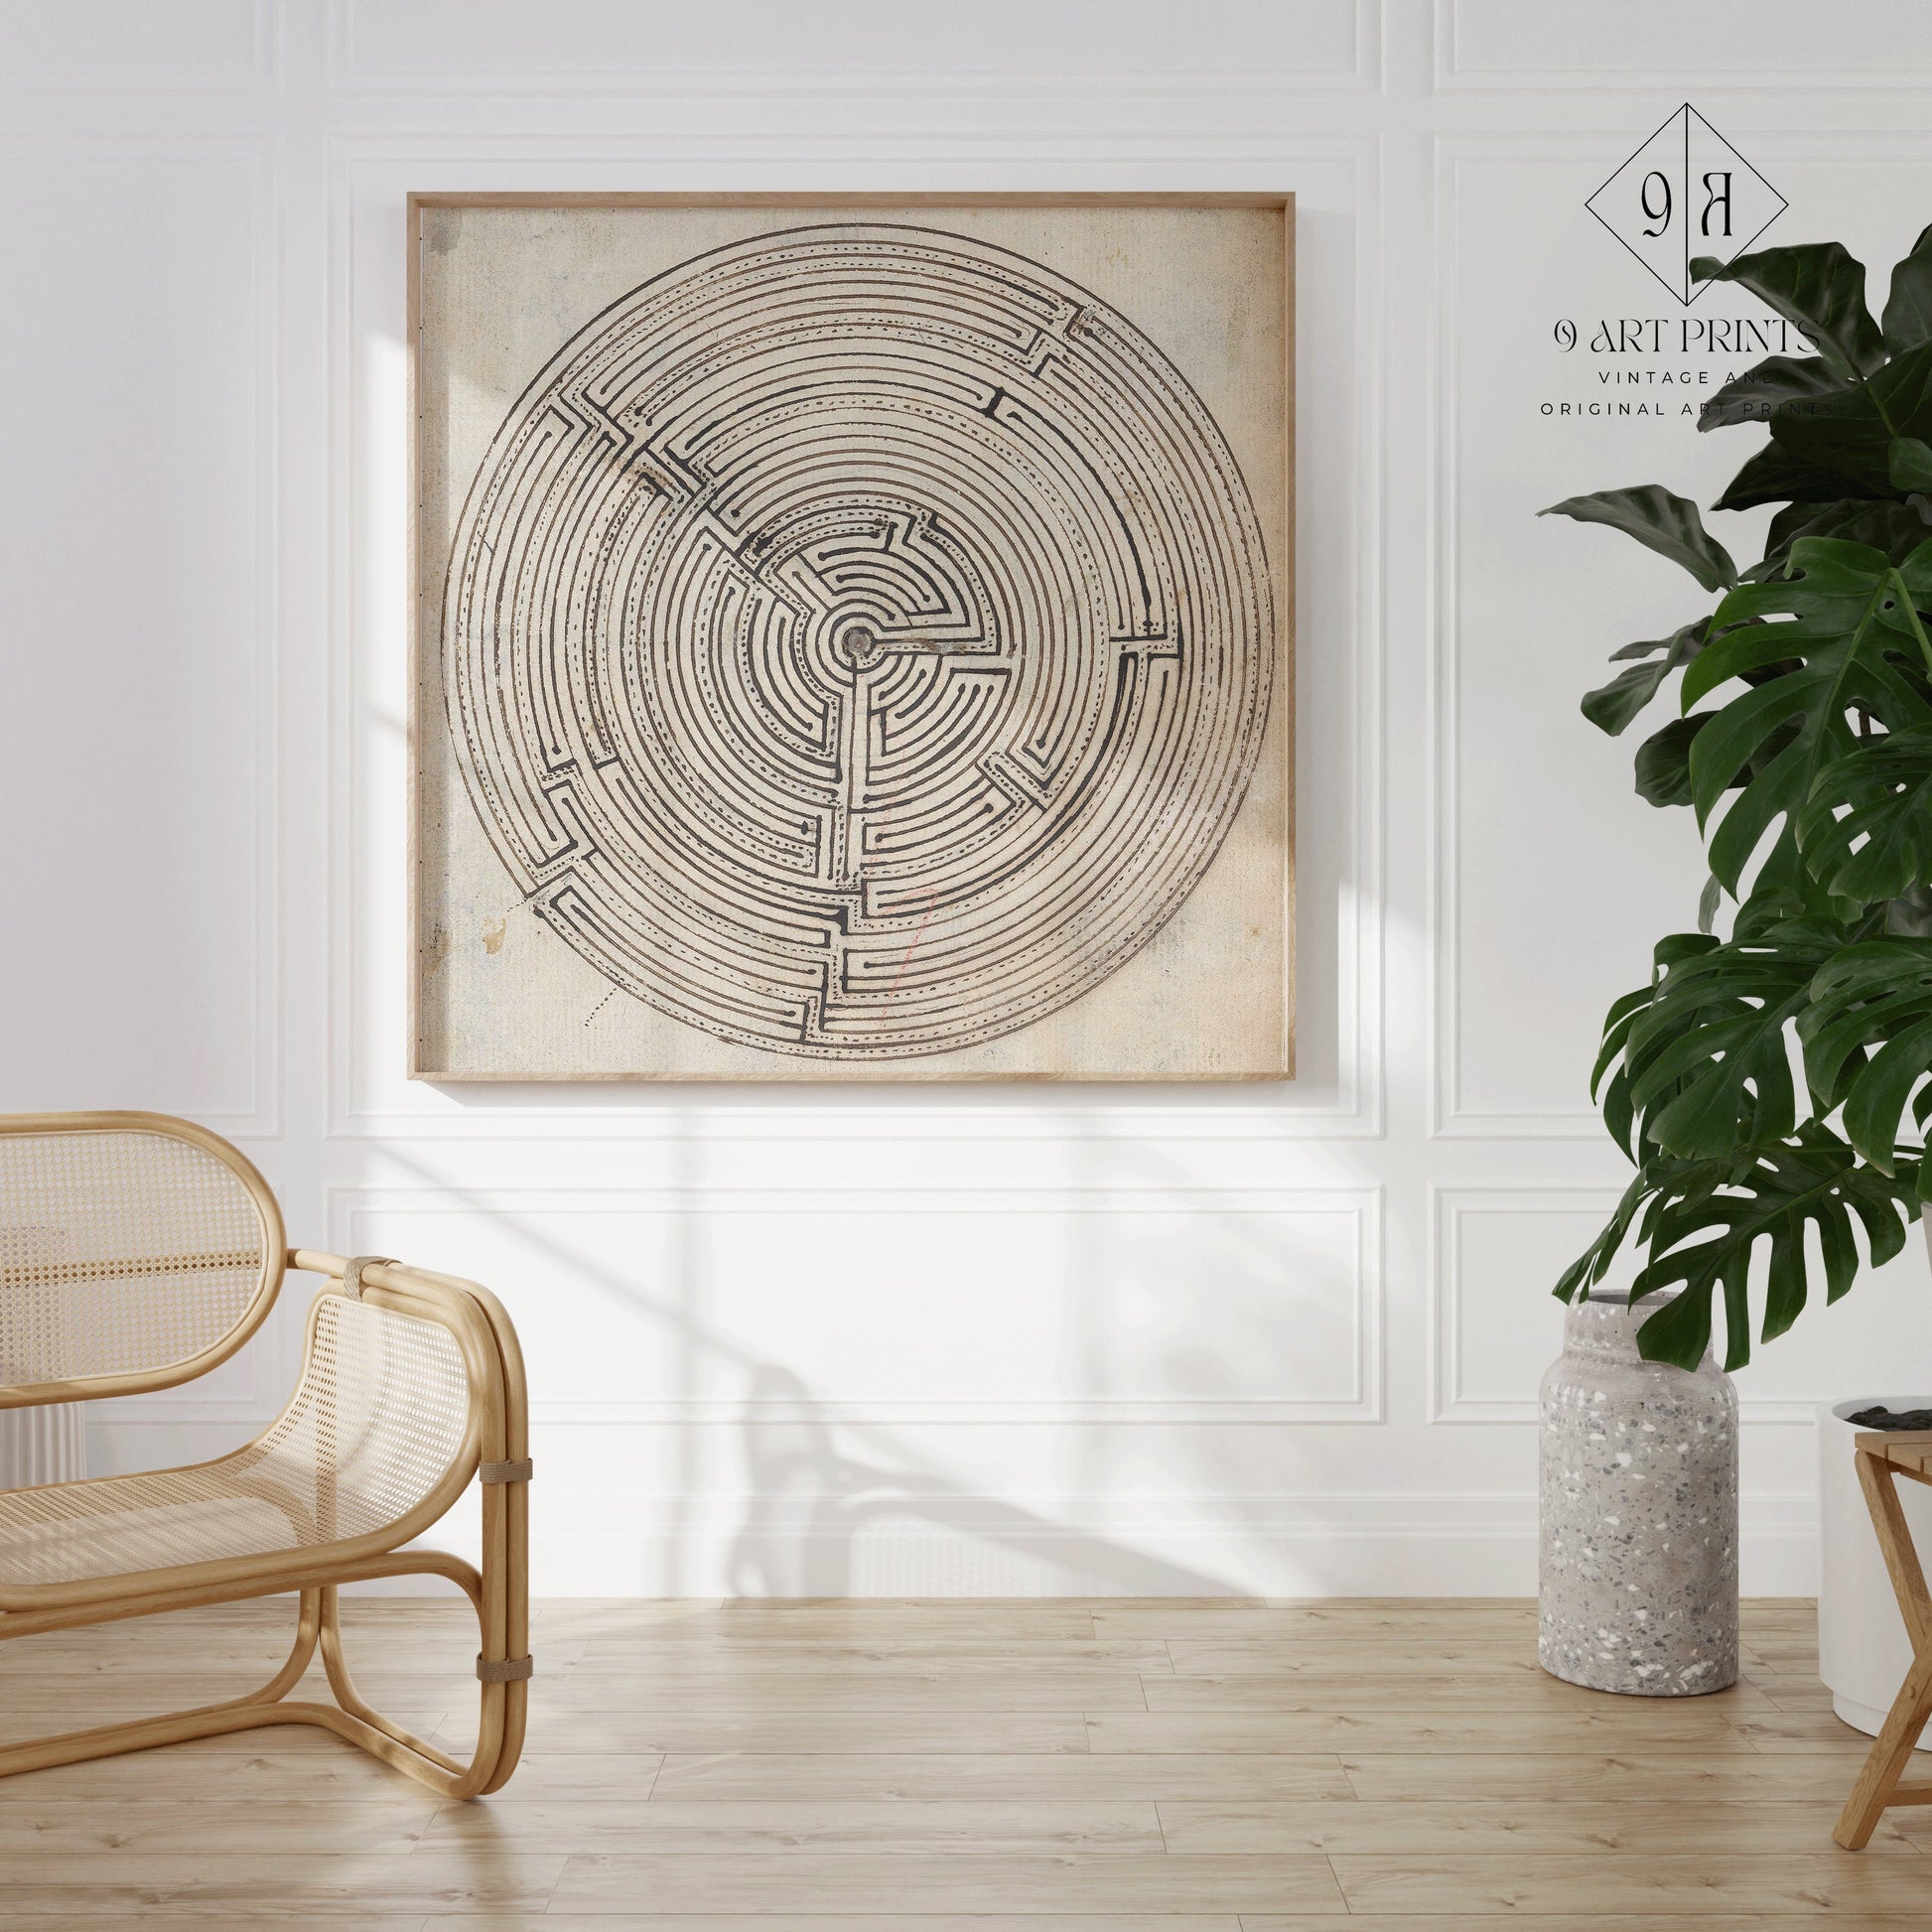 Jan Brandes - Labyrinth | Vintage Abstract Black and White Art (available framed or unframed)